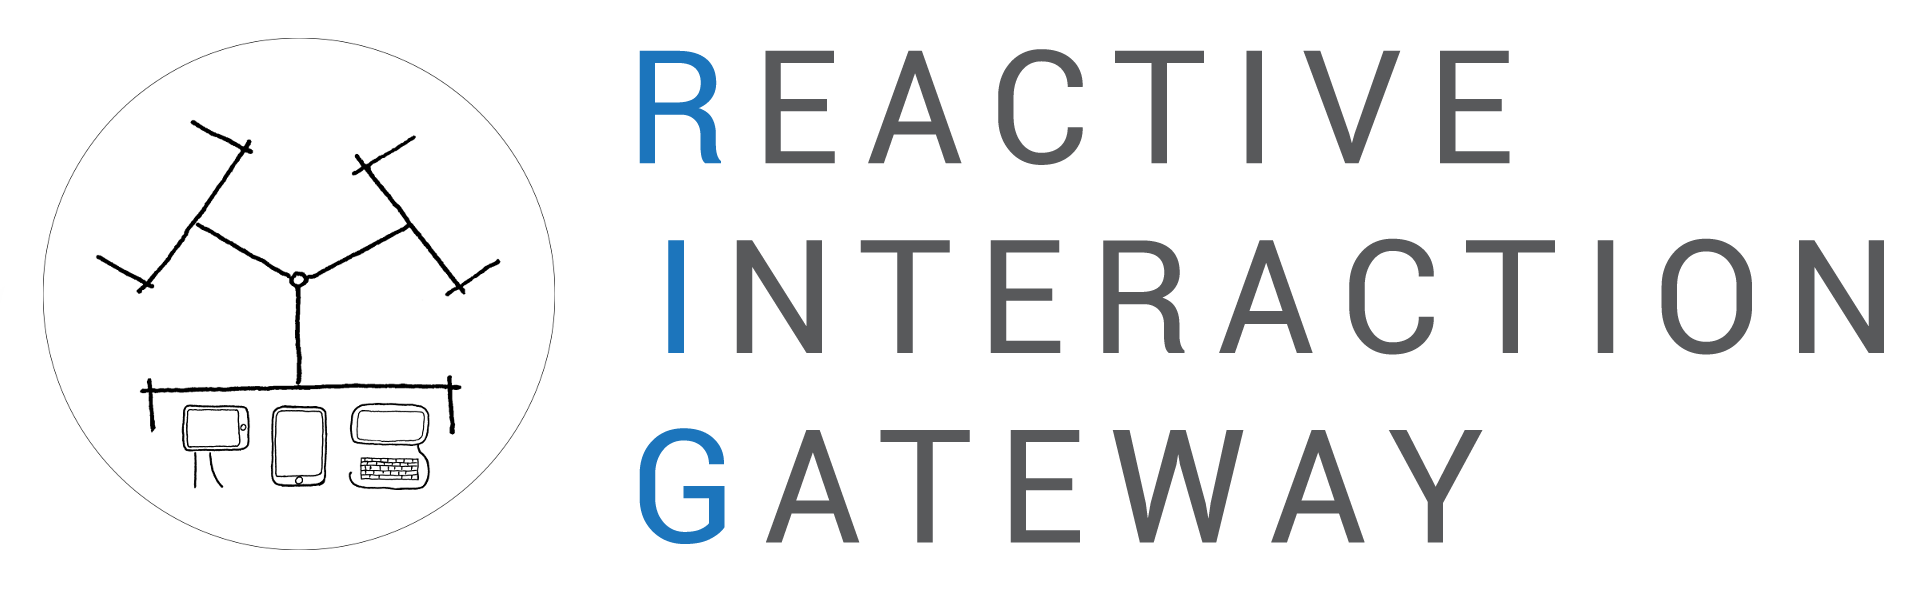 The Reactive Interaction Gateway.